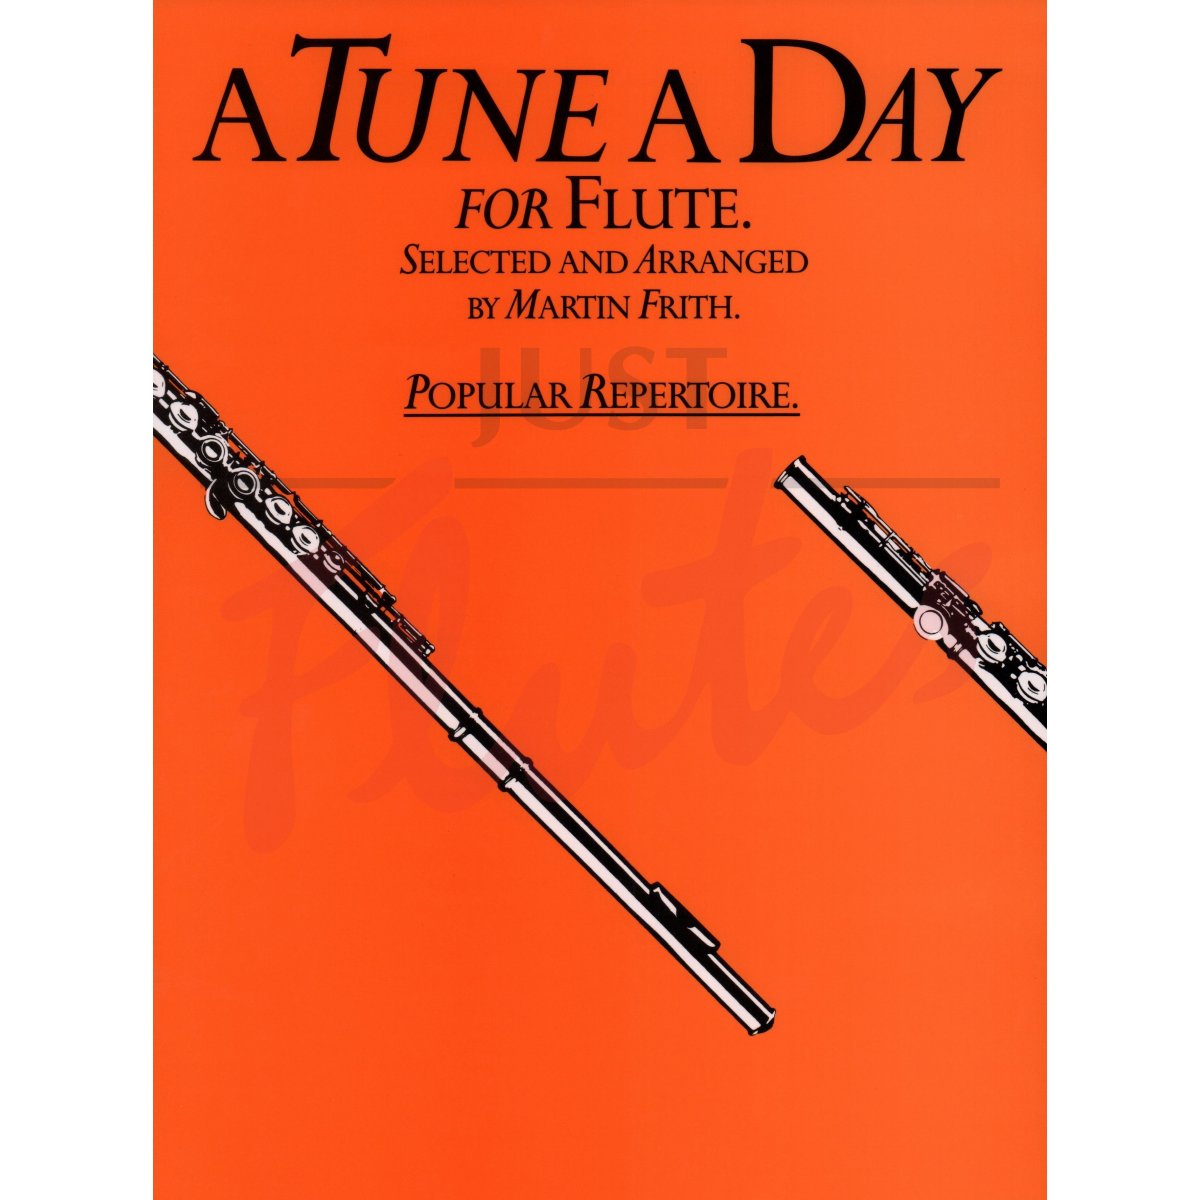 A Tune a Day for Flute: Popular Repertoire